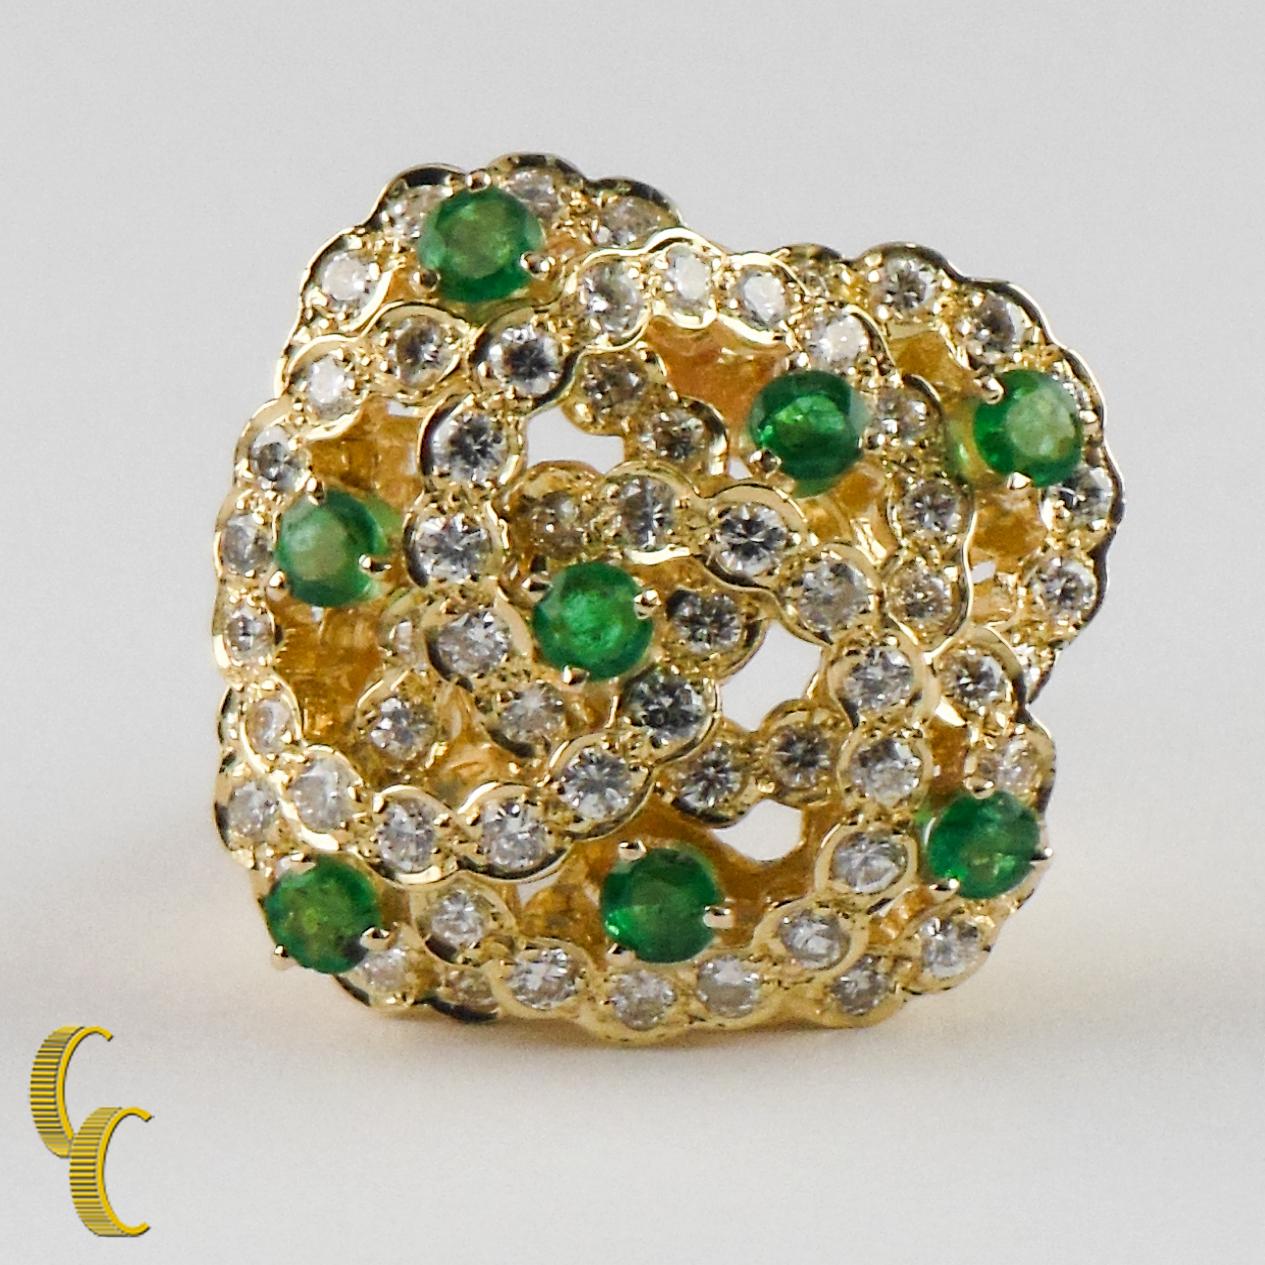 Gorgeous, Unique Diamond and Emerald Cocktail Ring
Features Bead-Set Diamond Interlocking Rings w/ Interspersed Prong-Set Emeralds set atop an elevated wire gallery
18k Yellow Gold Setting
Approximate Diameter of Each Ring = 15 mm
Approximate